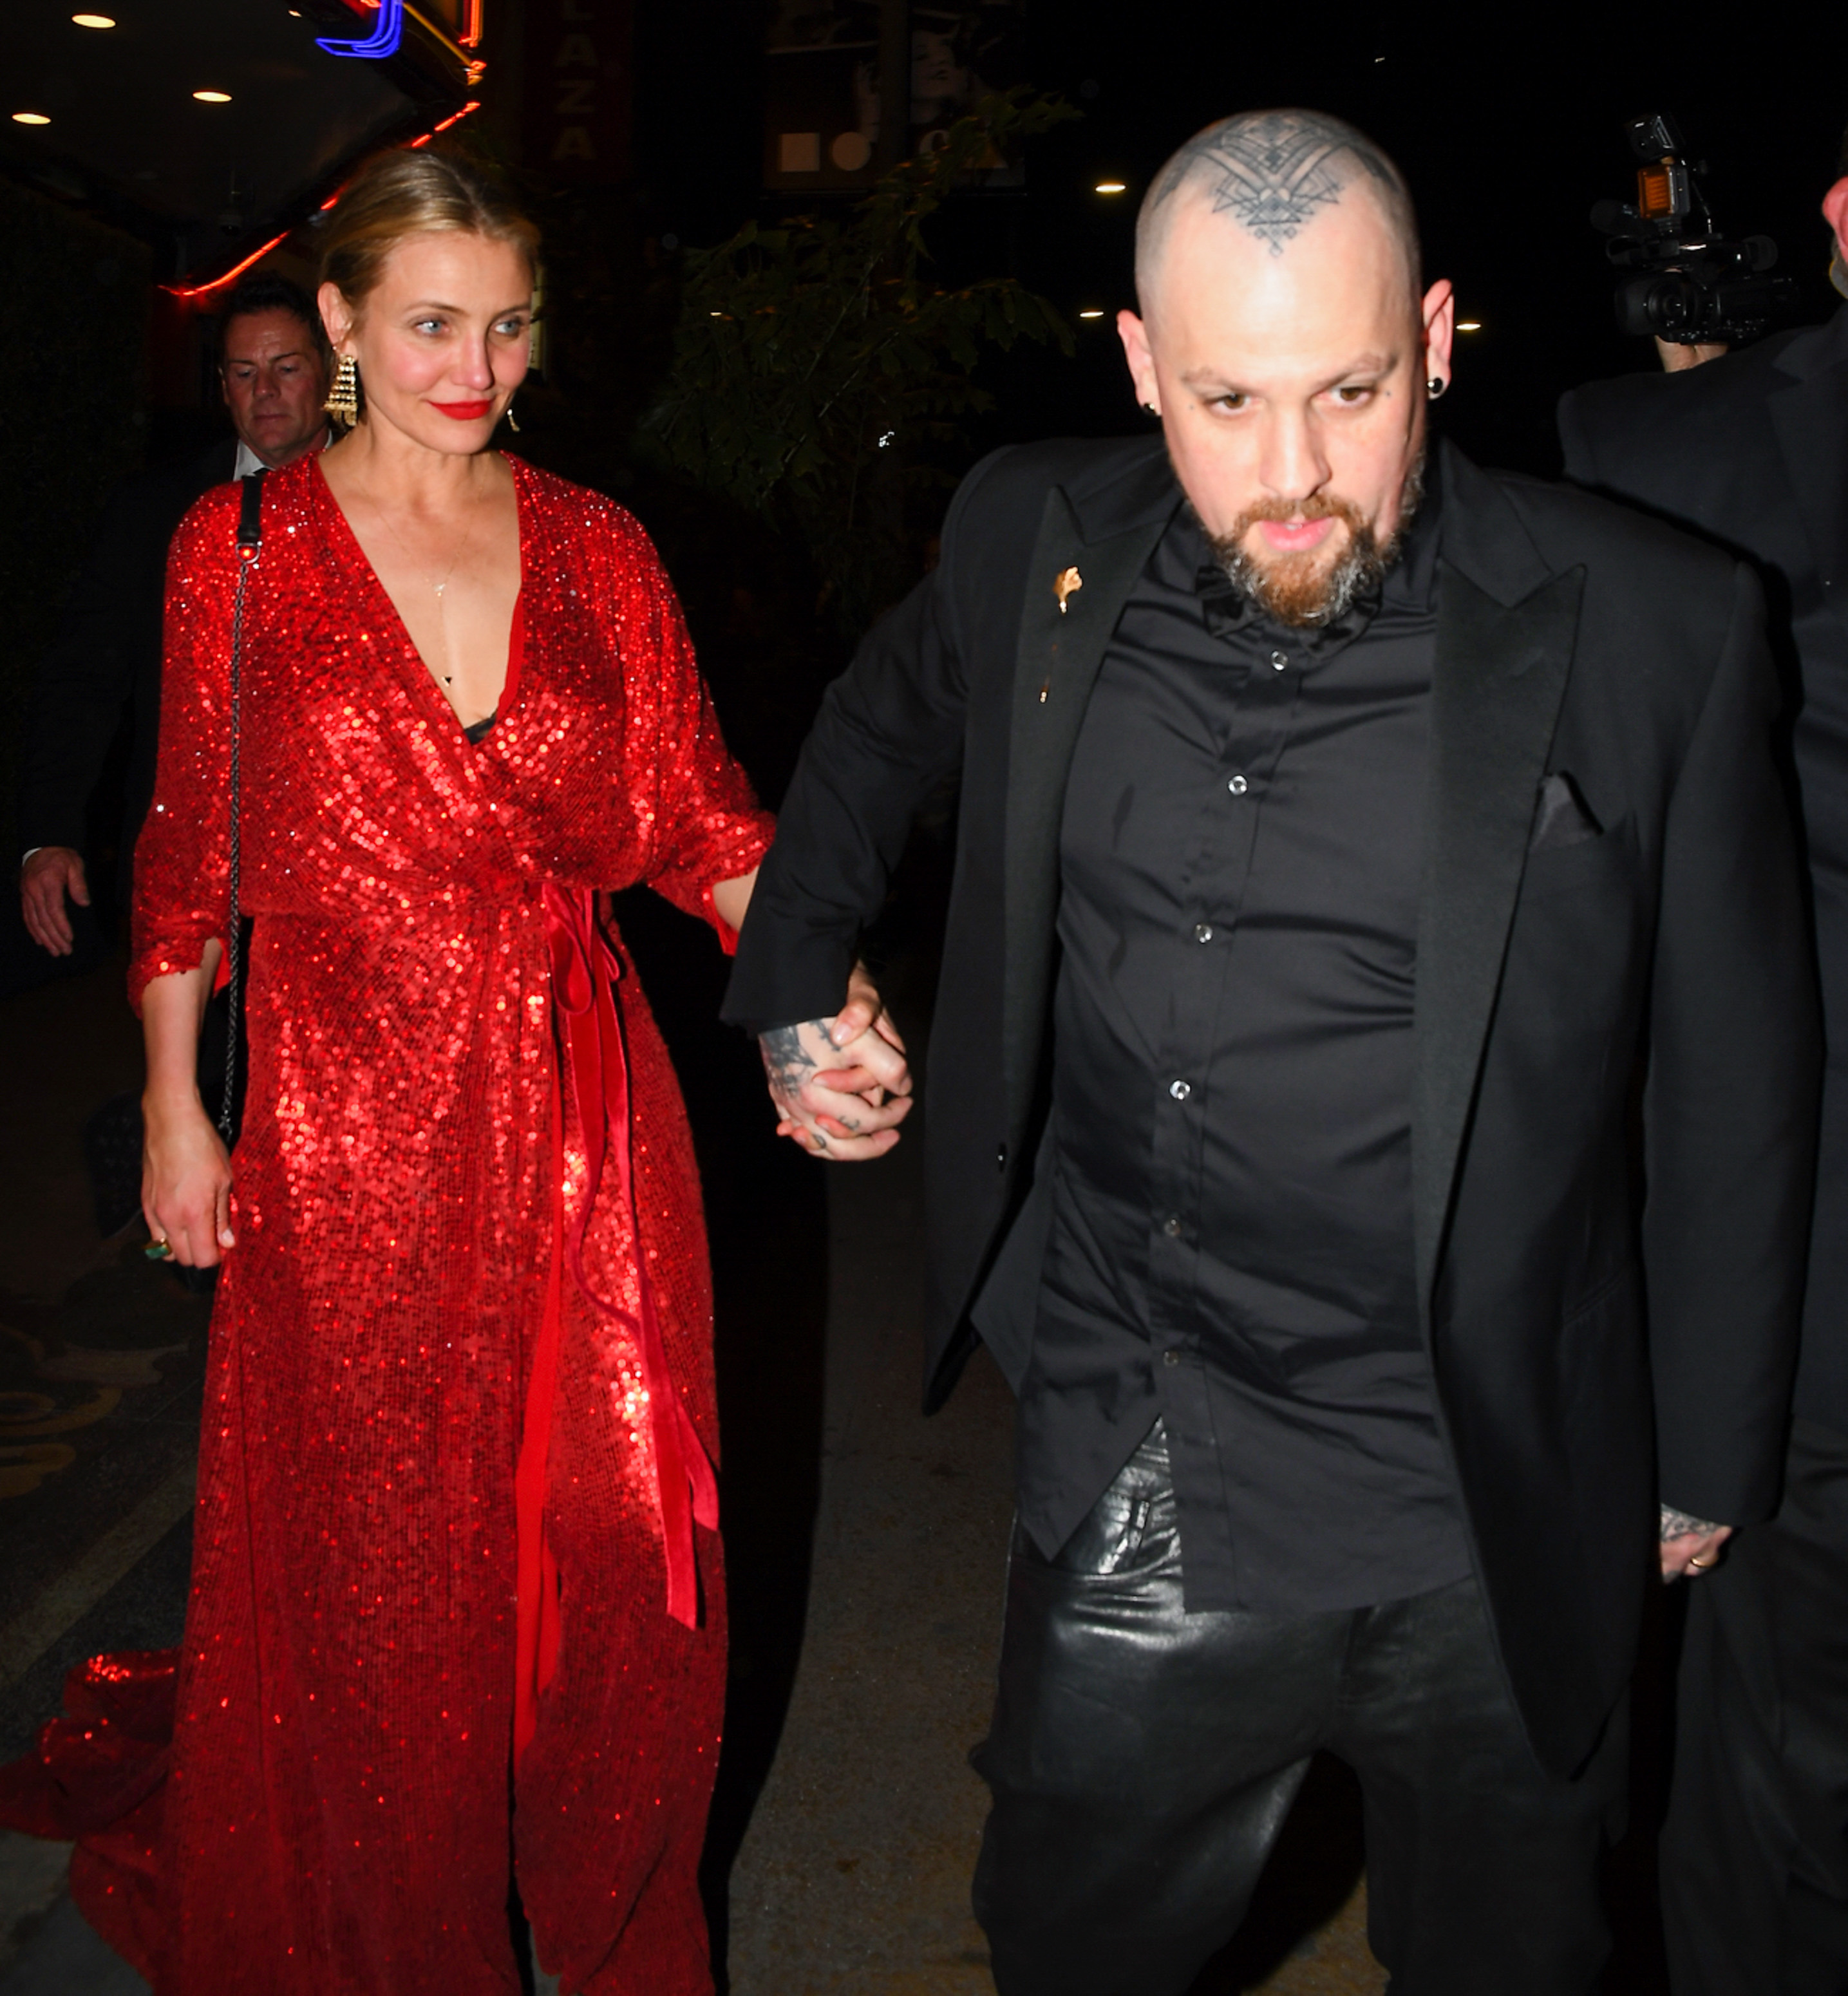  Cameron Diaz and Benji Madden pictured in Los Angeles, California, in May 2018